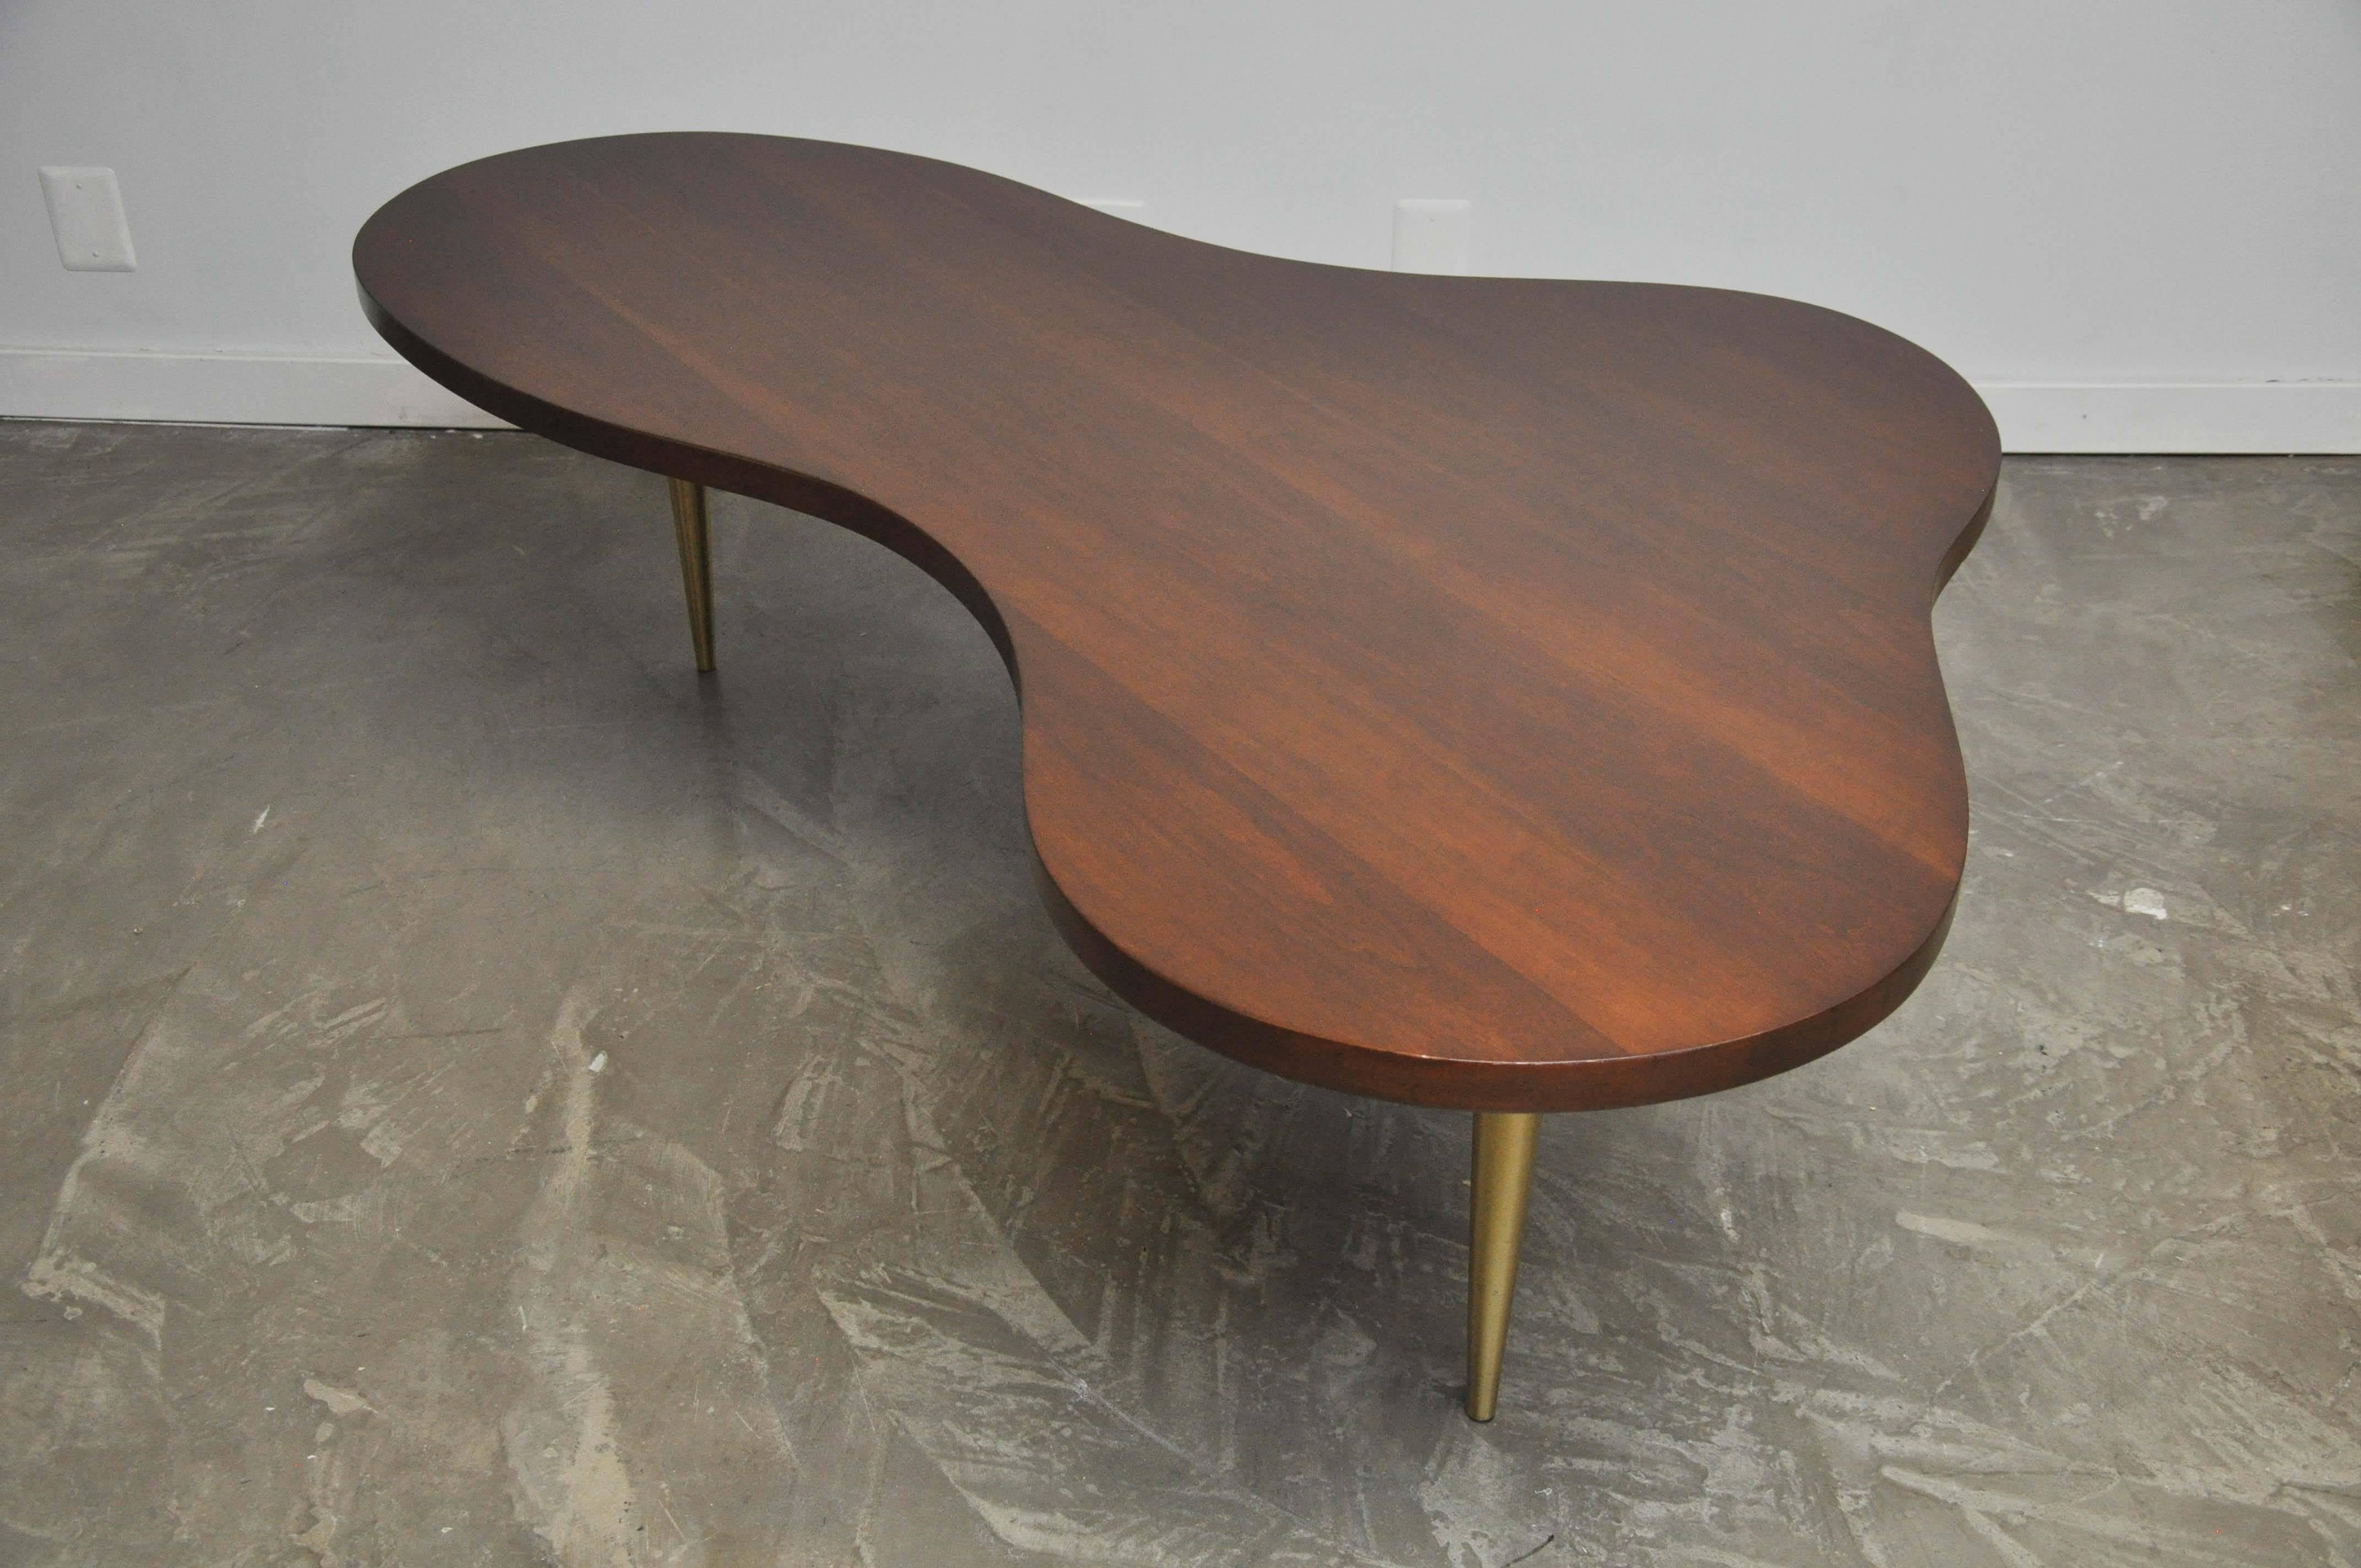 20th Century Monumental Biomorphic Walnut and Brass Table by T.H. Robsjohn-Gibbings